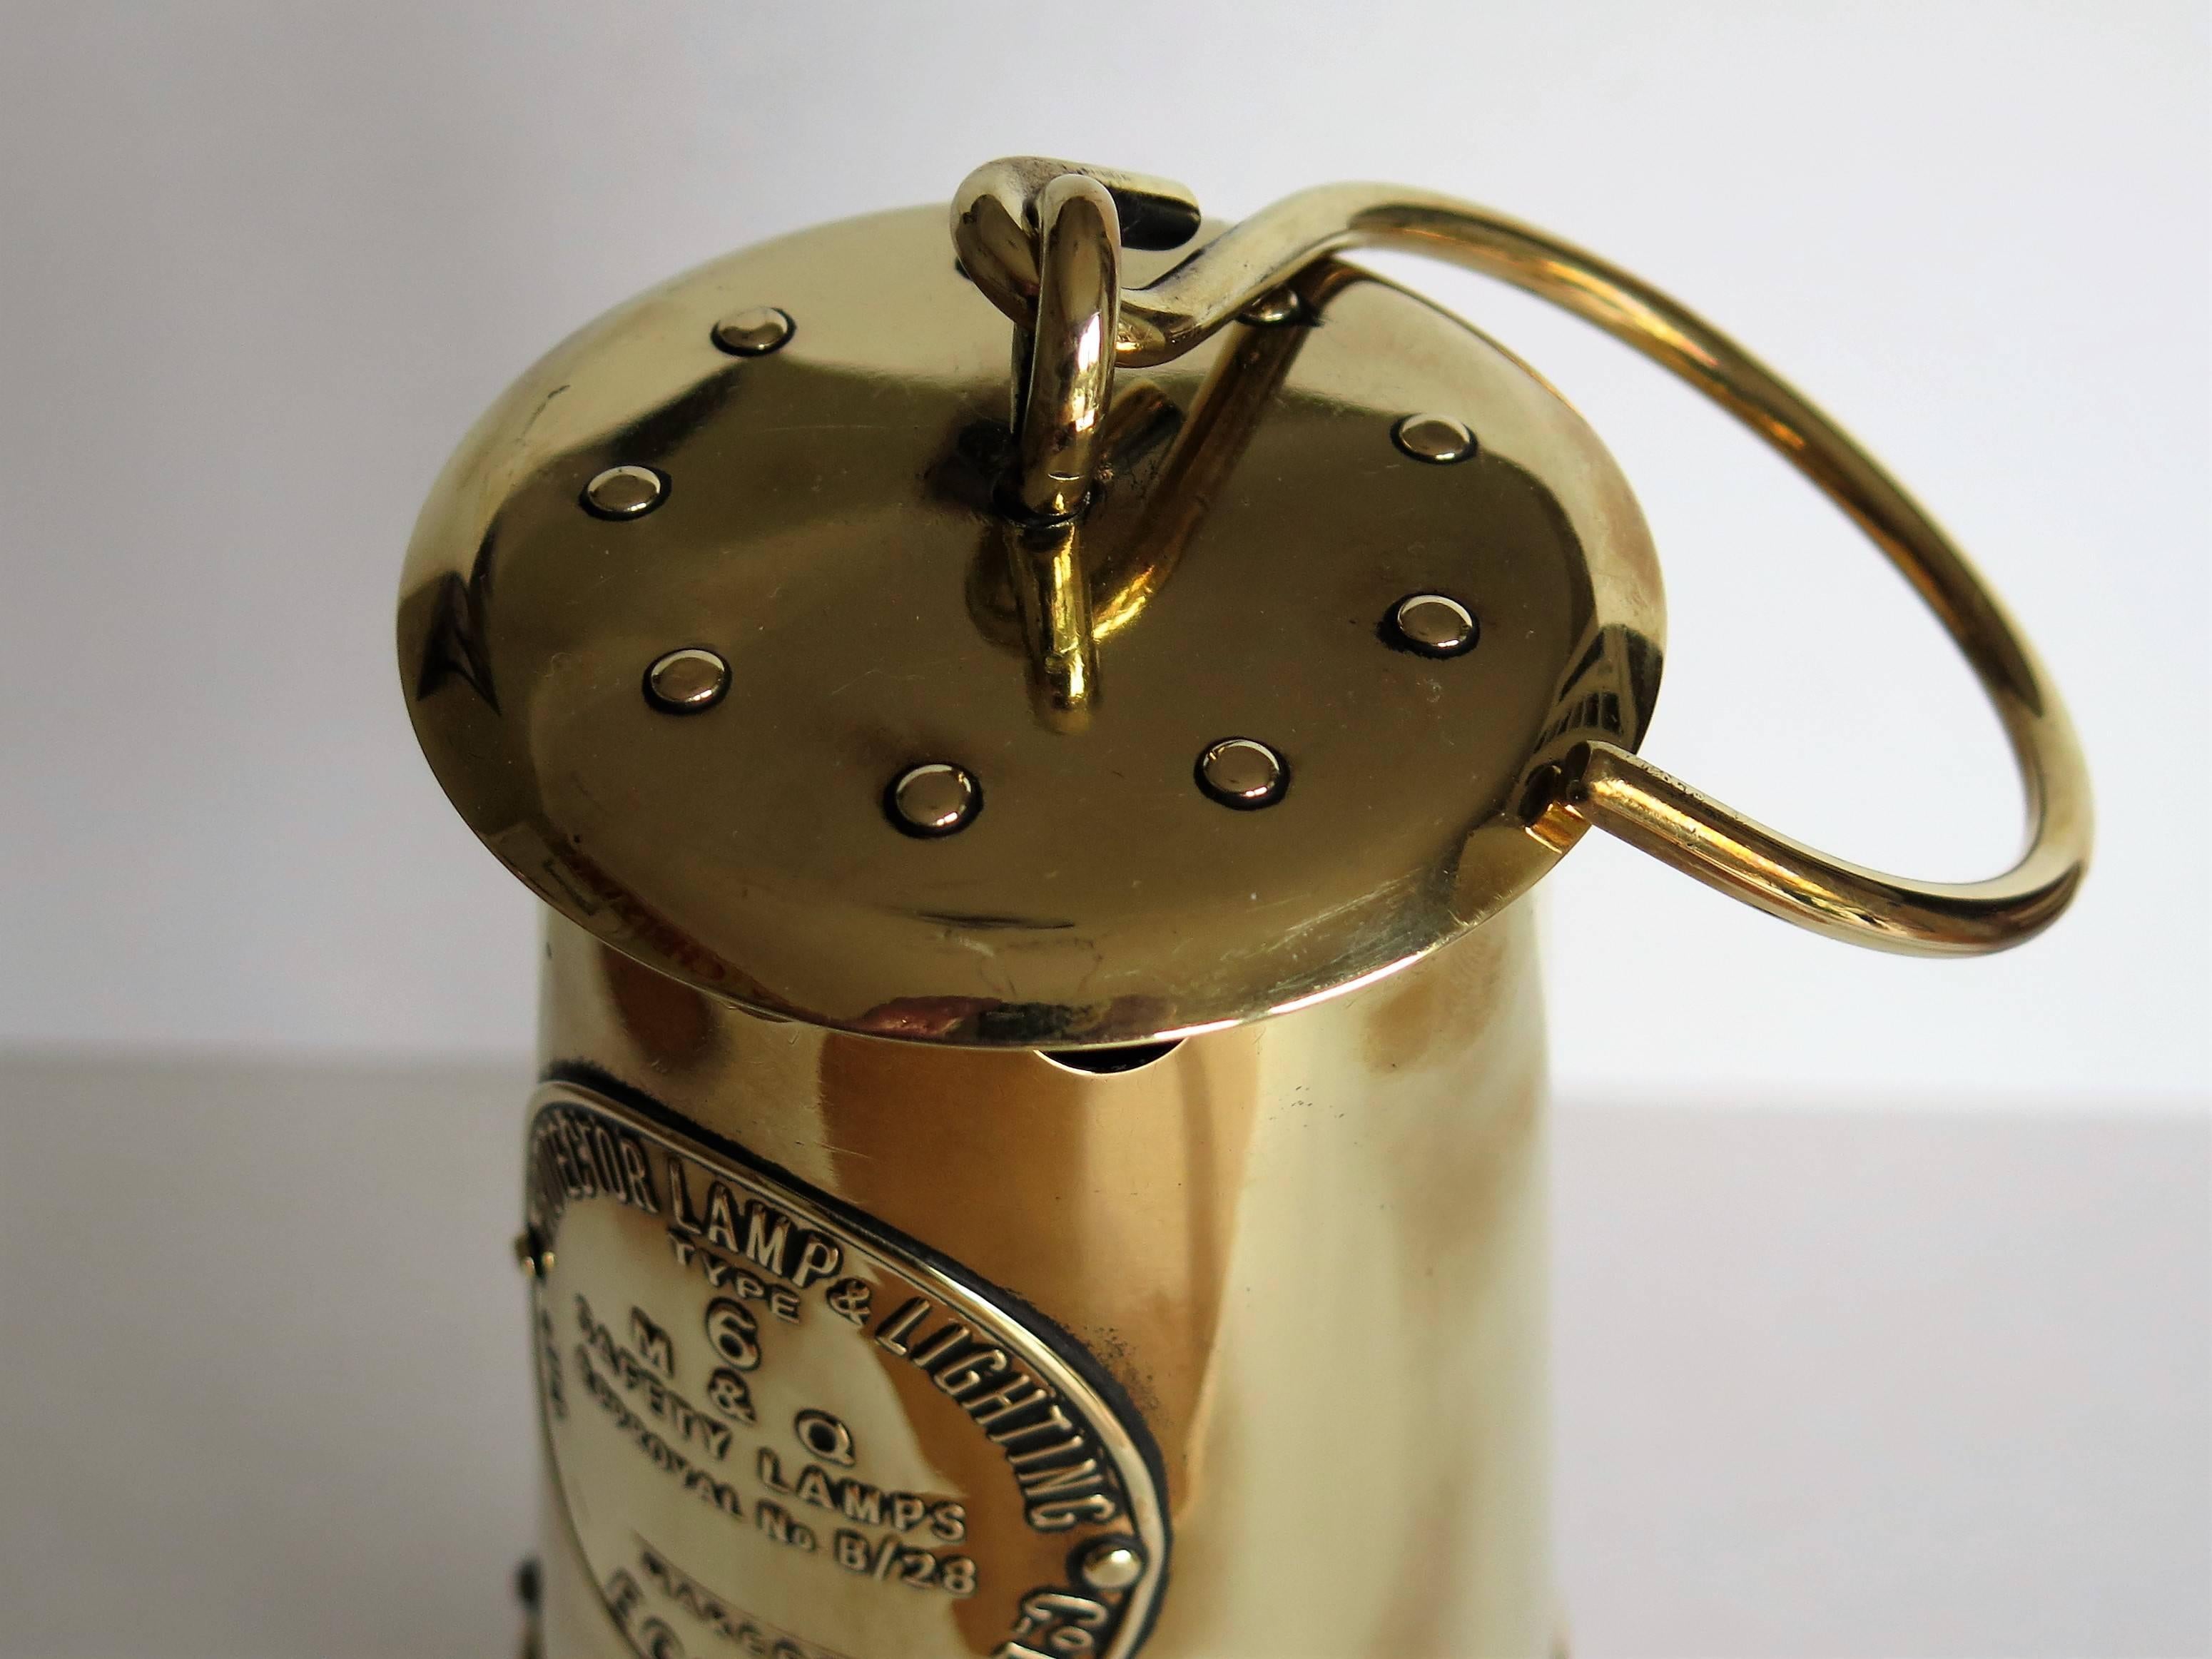 English Miner's Lamp All Brass Eccles Type 6 Protector Lamp & Lighting Co, Circa 1930